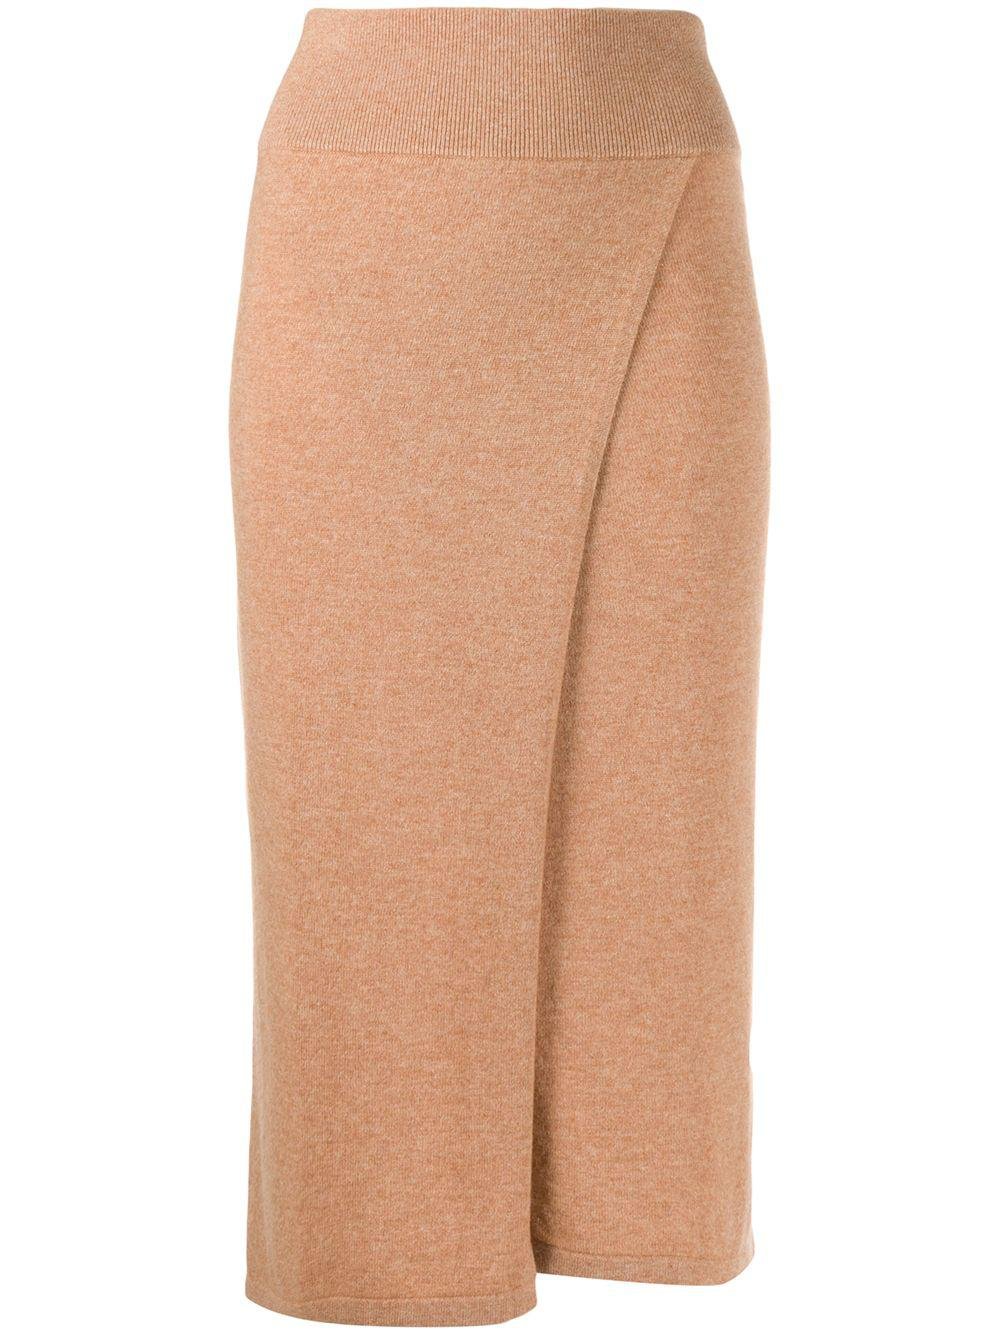 Lucia wrap knitted skirt by CASHMERE IN LOVE